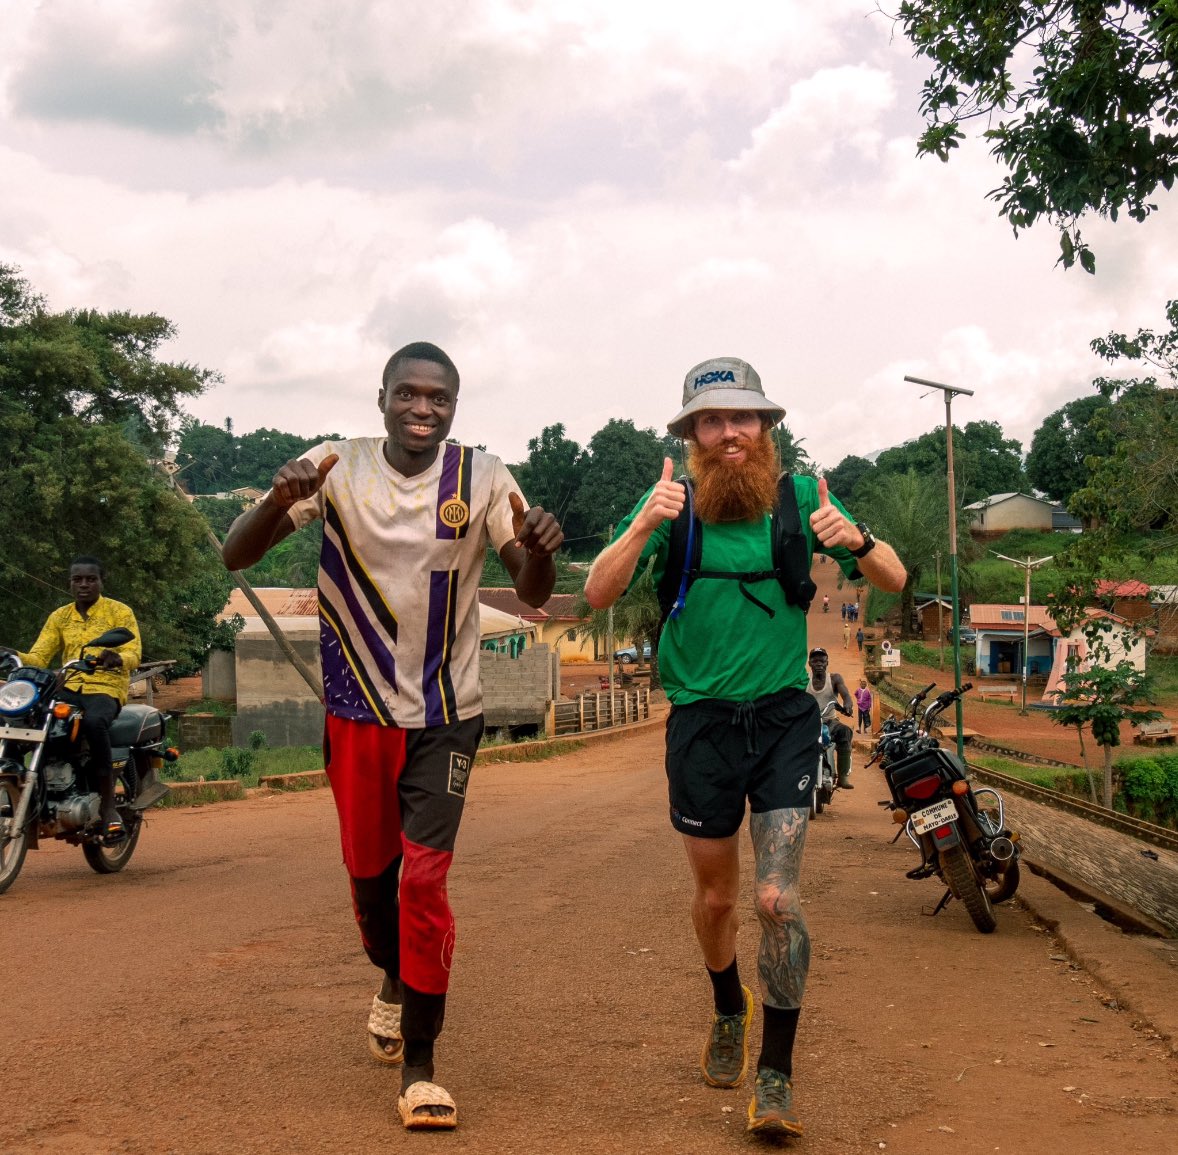 Good luck to Russ Cook AKA @hardestgeezer who today will complete running the entire length of Africa! 🤯 Over 350 days running over 16,000km is just incredible 🙌 #runr